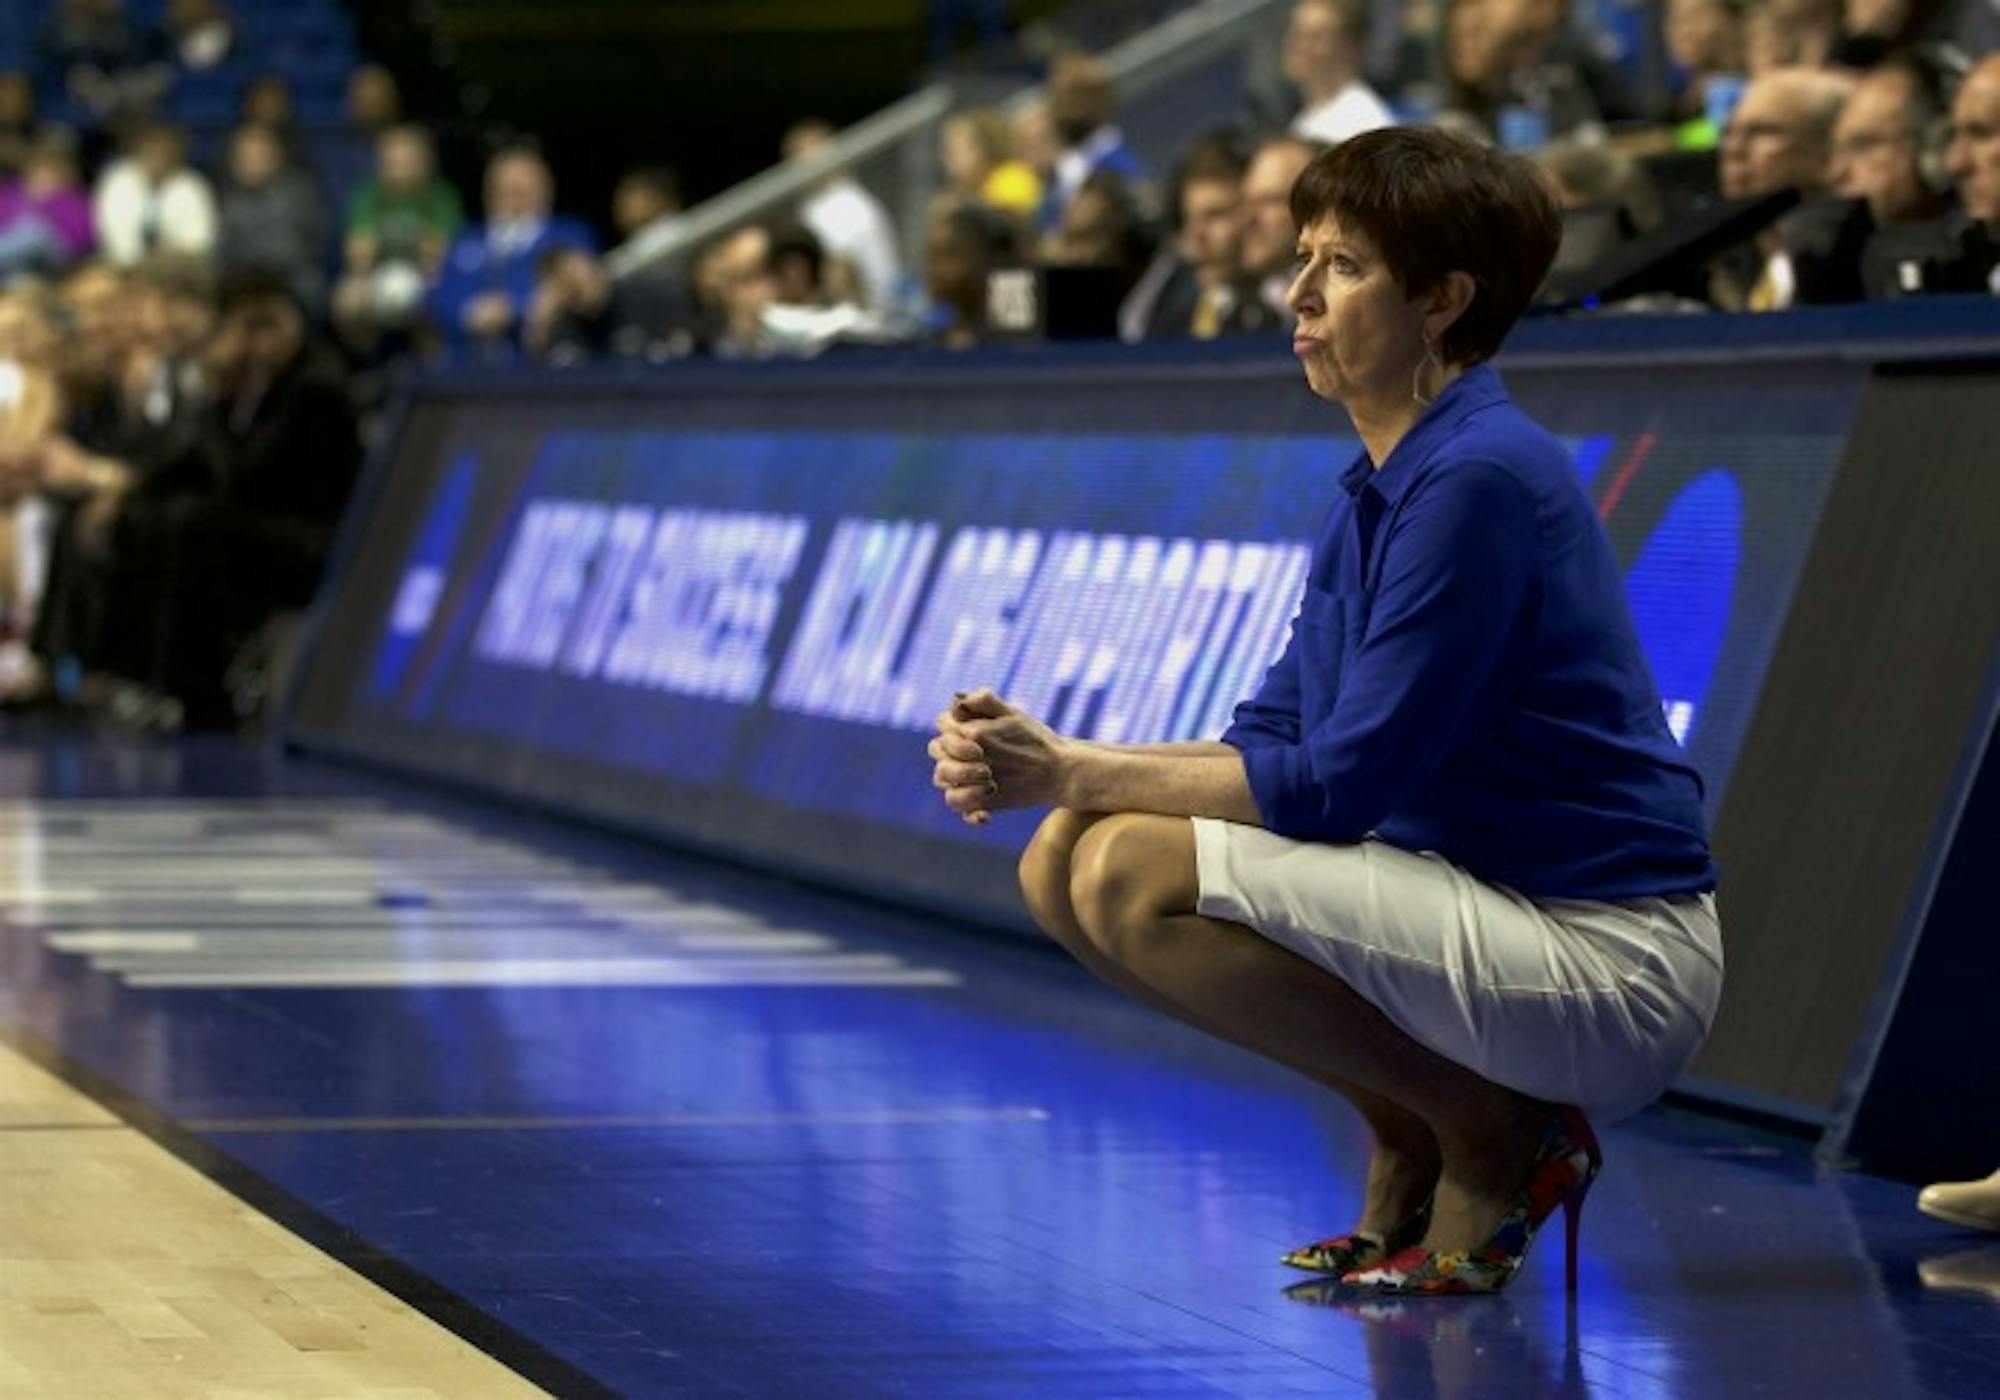 Irish head coach Muffet McGraw surveys the court during Notre Dame's 90-84 loss to Stanford in the NCAA tournament Friday night in Lexington, Kentucky.